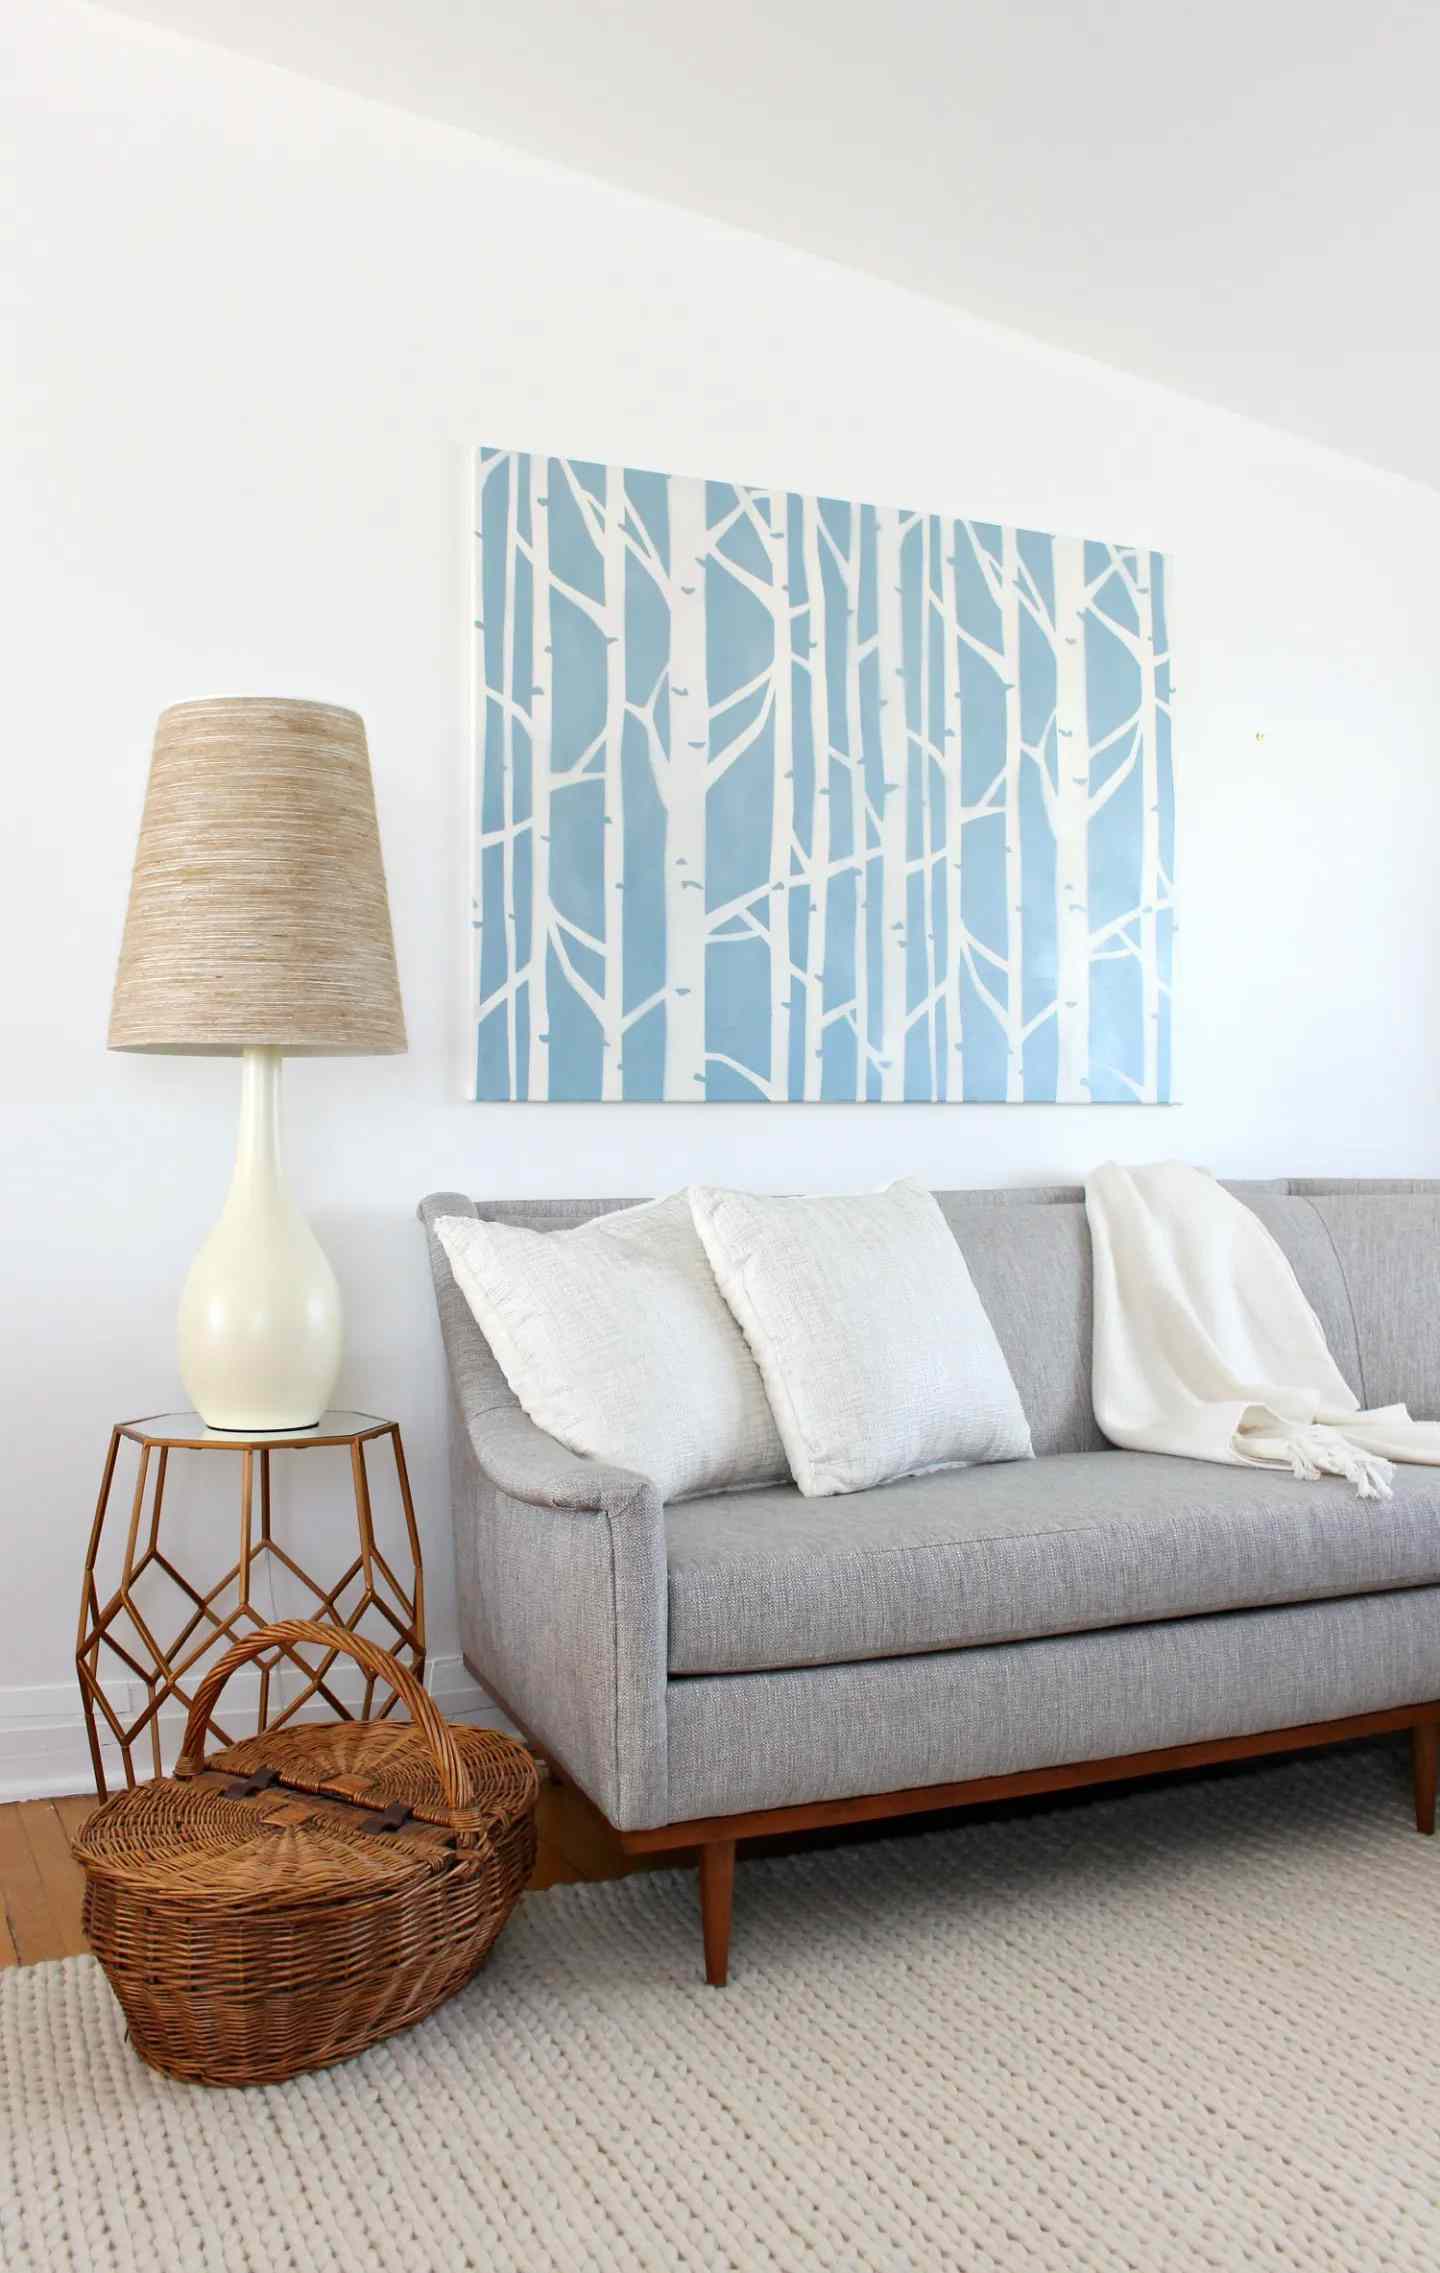 A large blue and white tree art in a living room